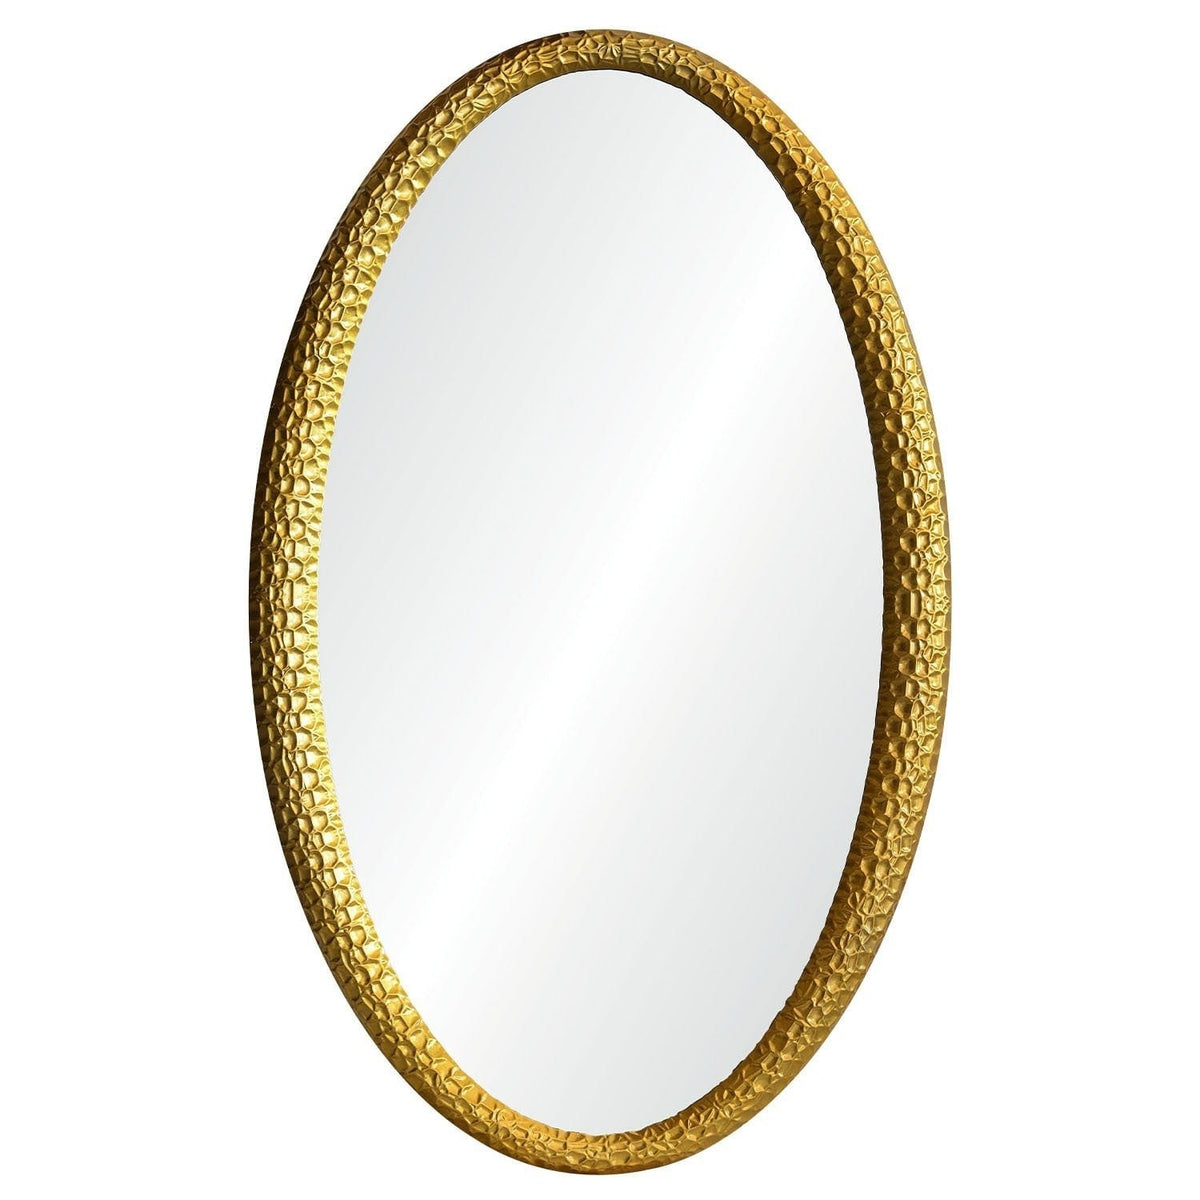 Mirror Image Home - Martele Gold Oval Mirror by Jamie Drake | Fig Linens